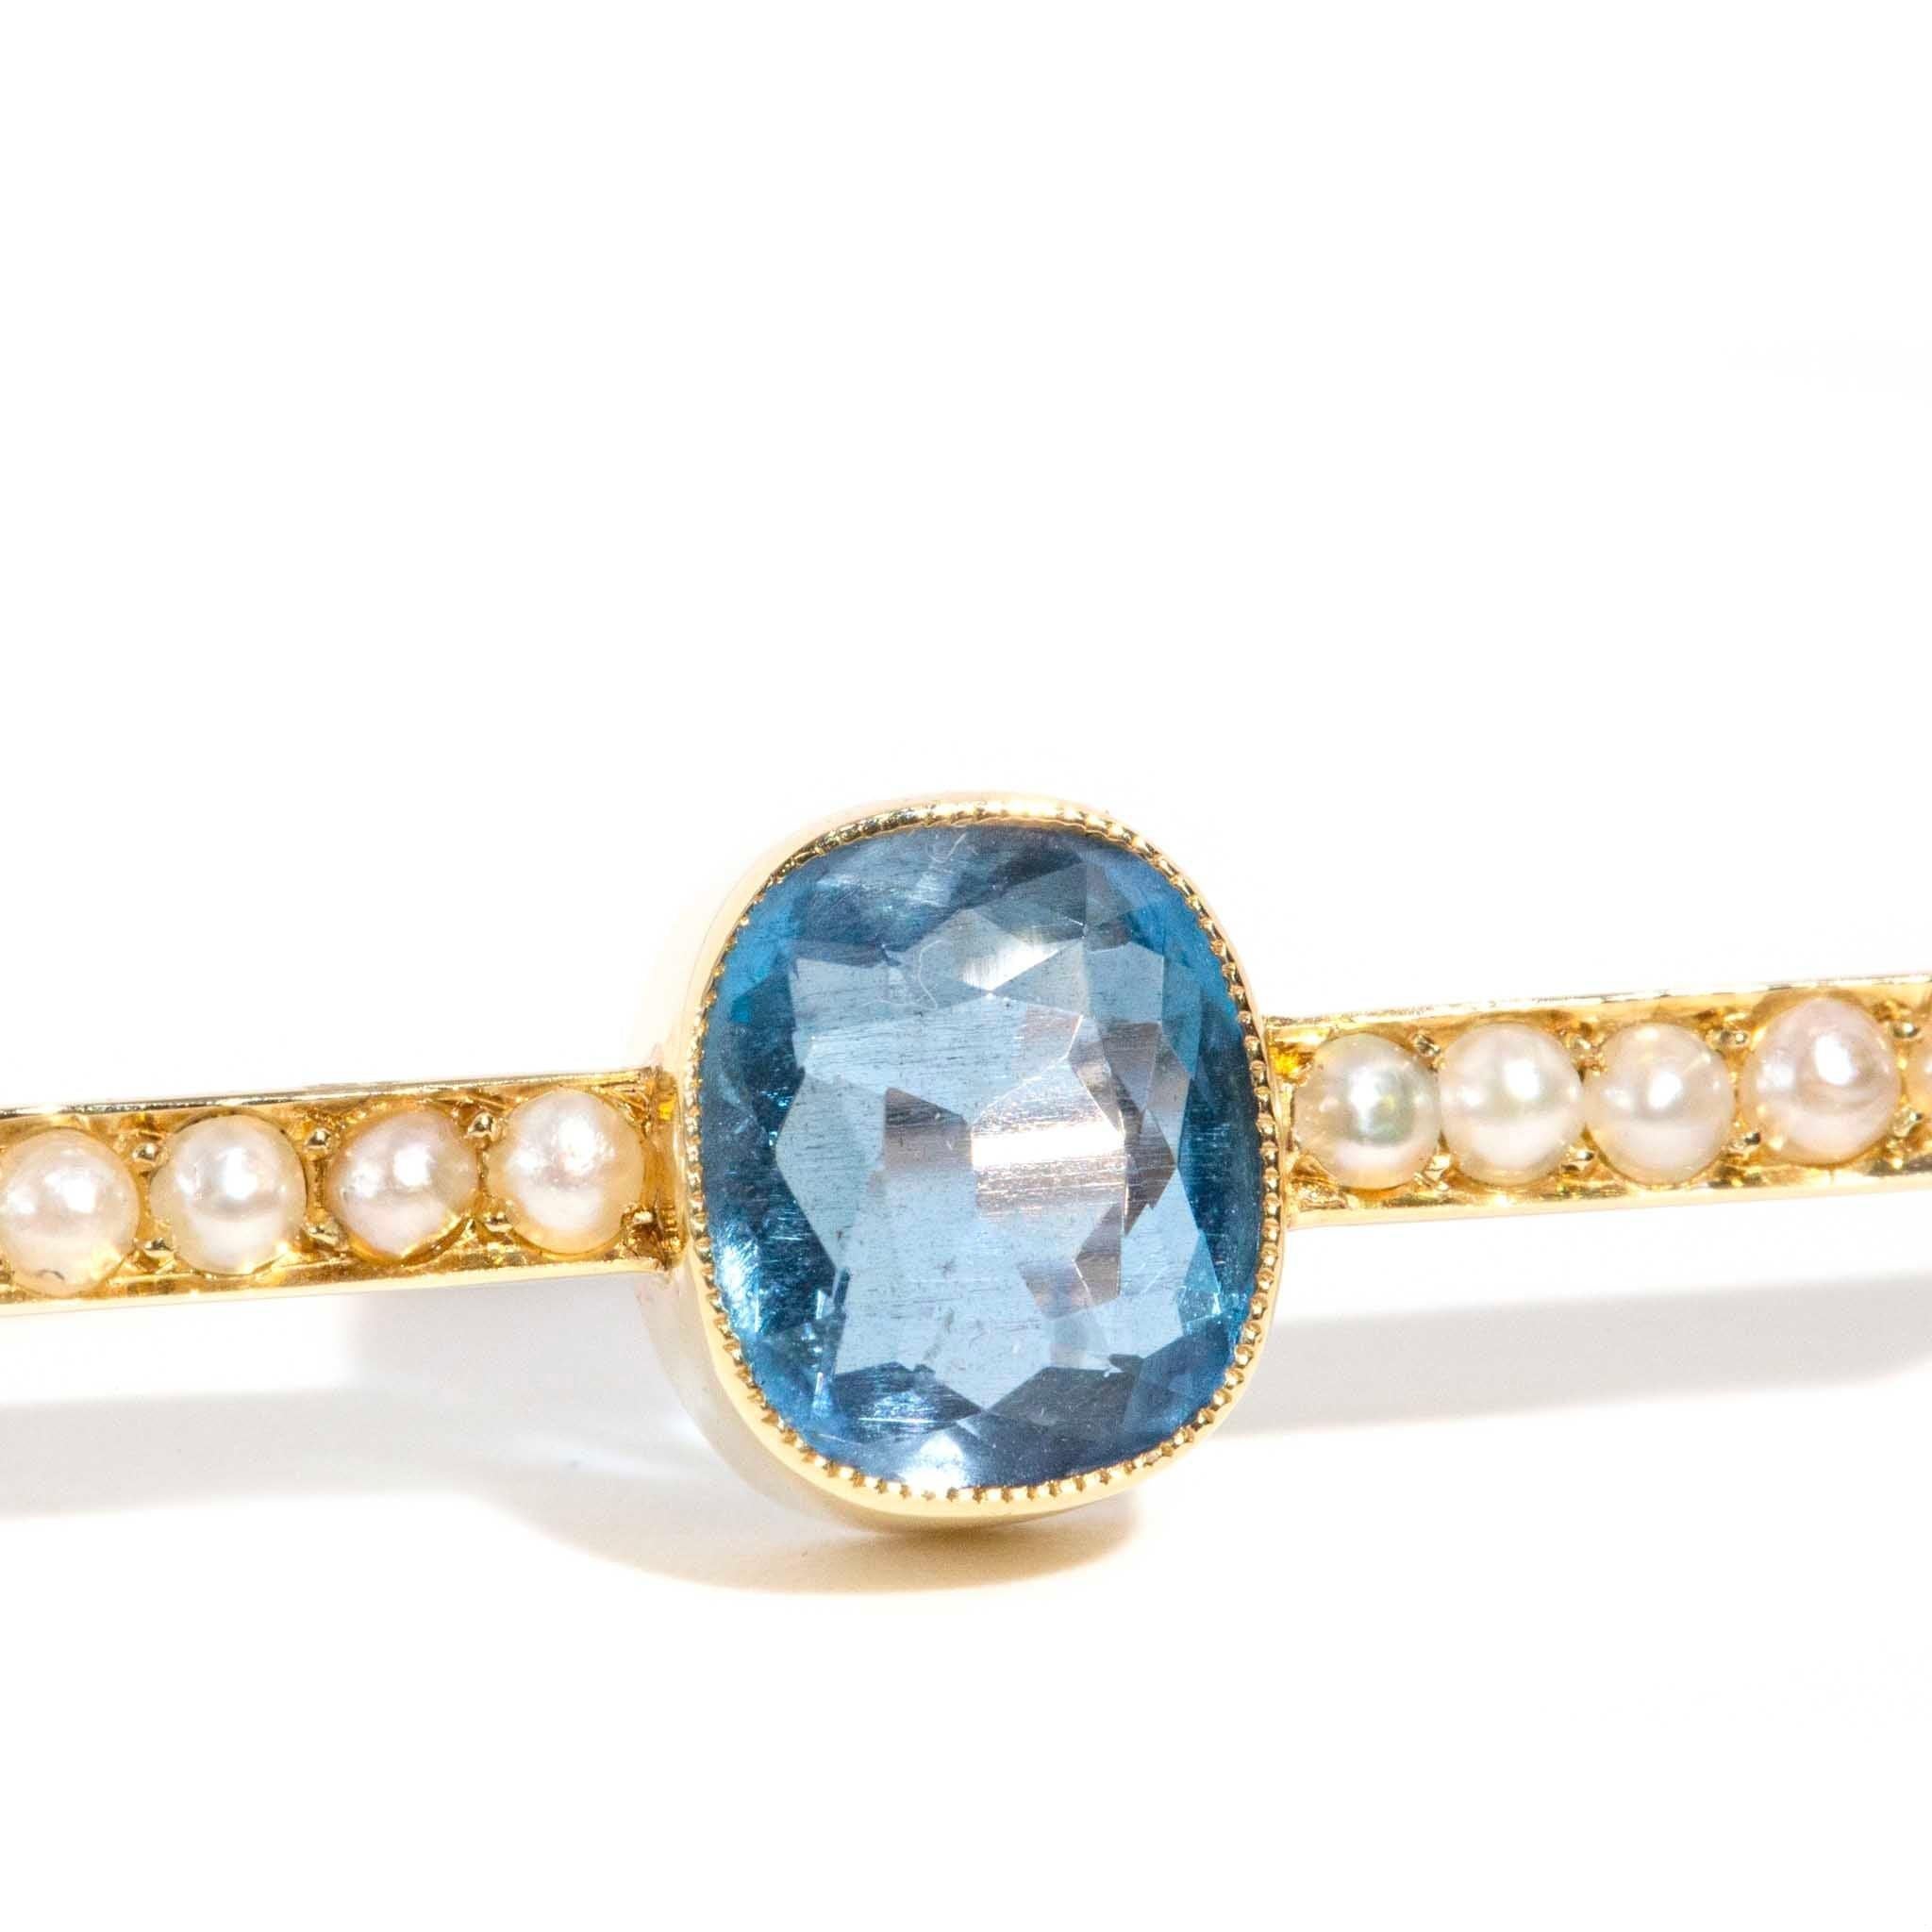 Vintage Circa 1930s Aquamarine & Seed Pearl Brooch 15 Carat Yellow Gold For Sale 2